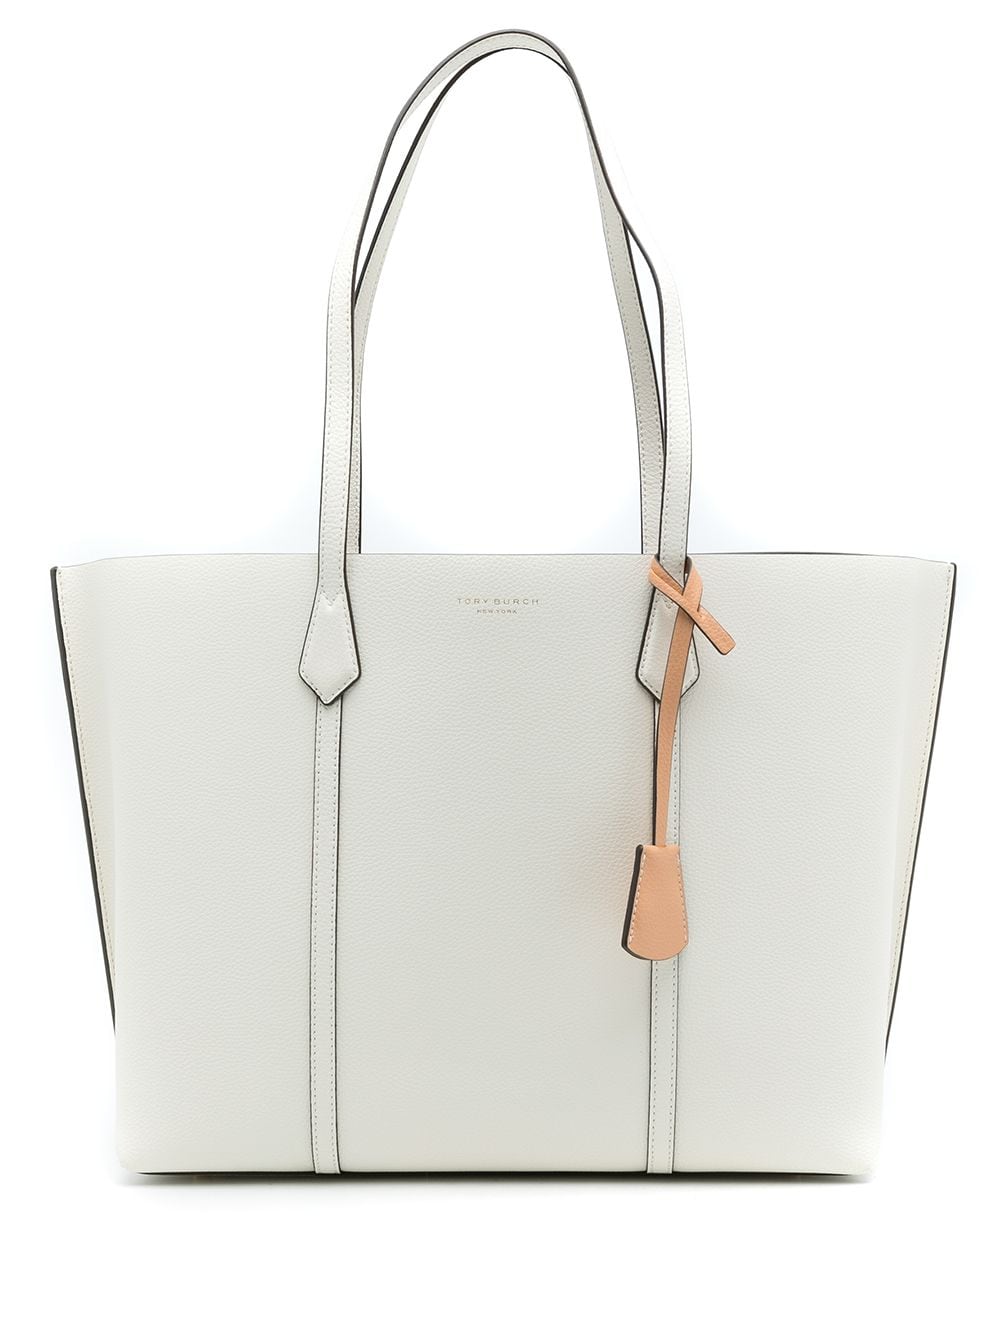 Tory Burch Perry Triple-compartment Tote Bag in White